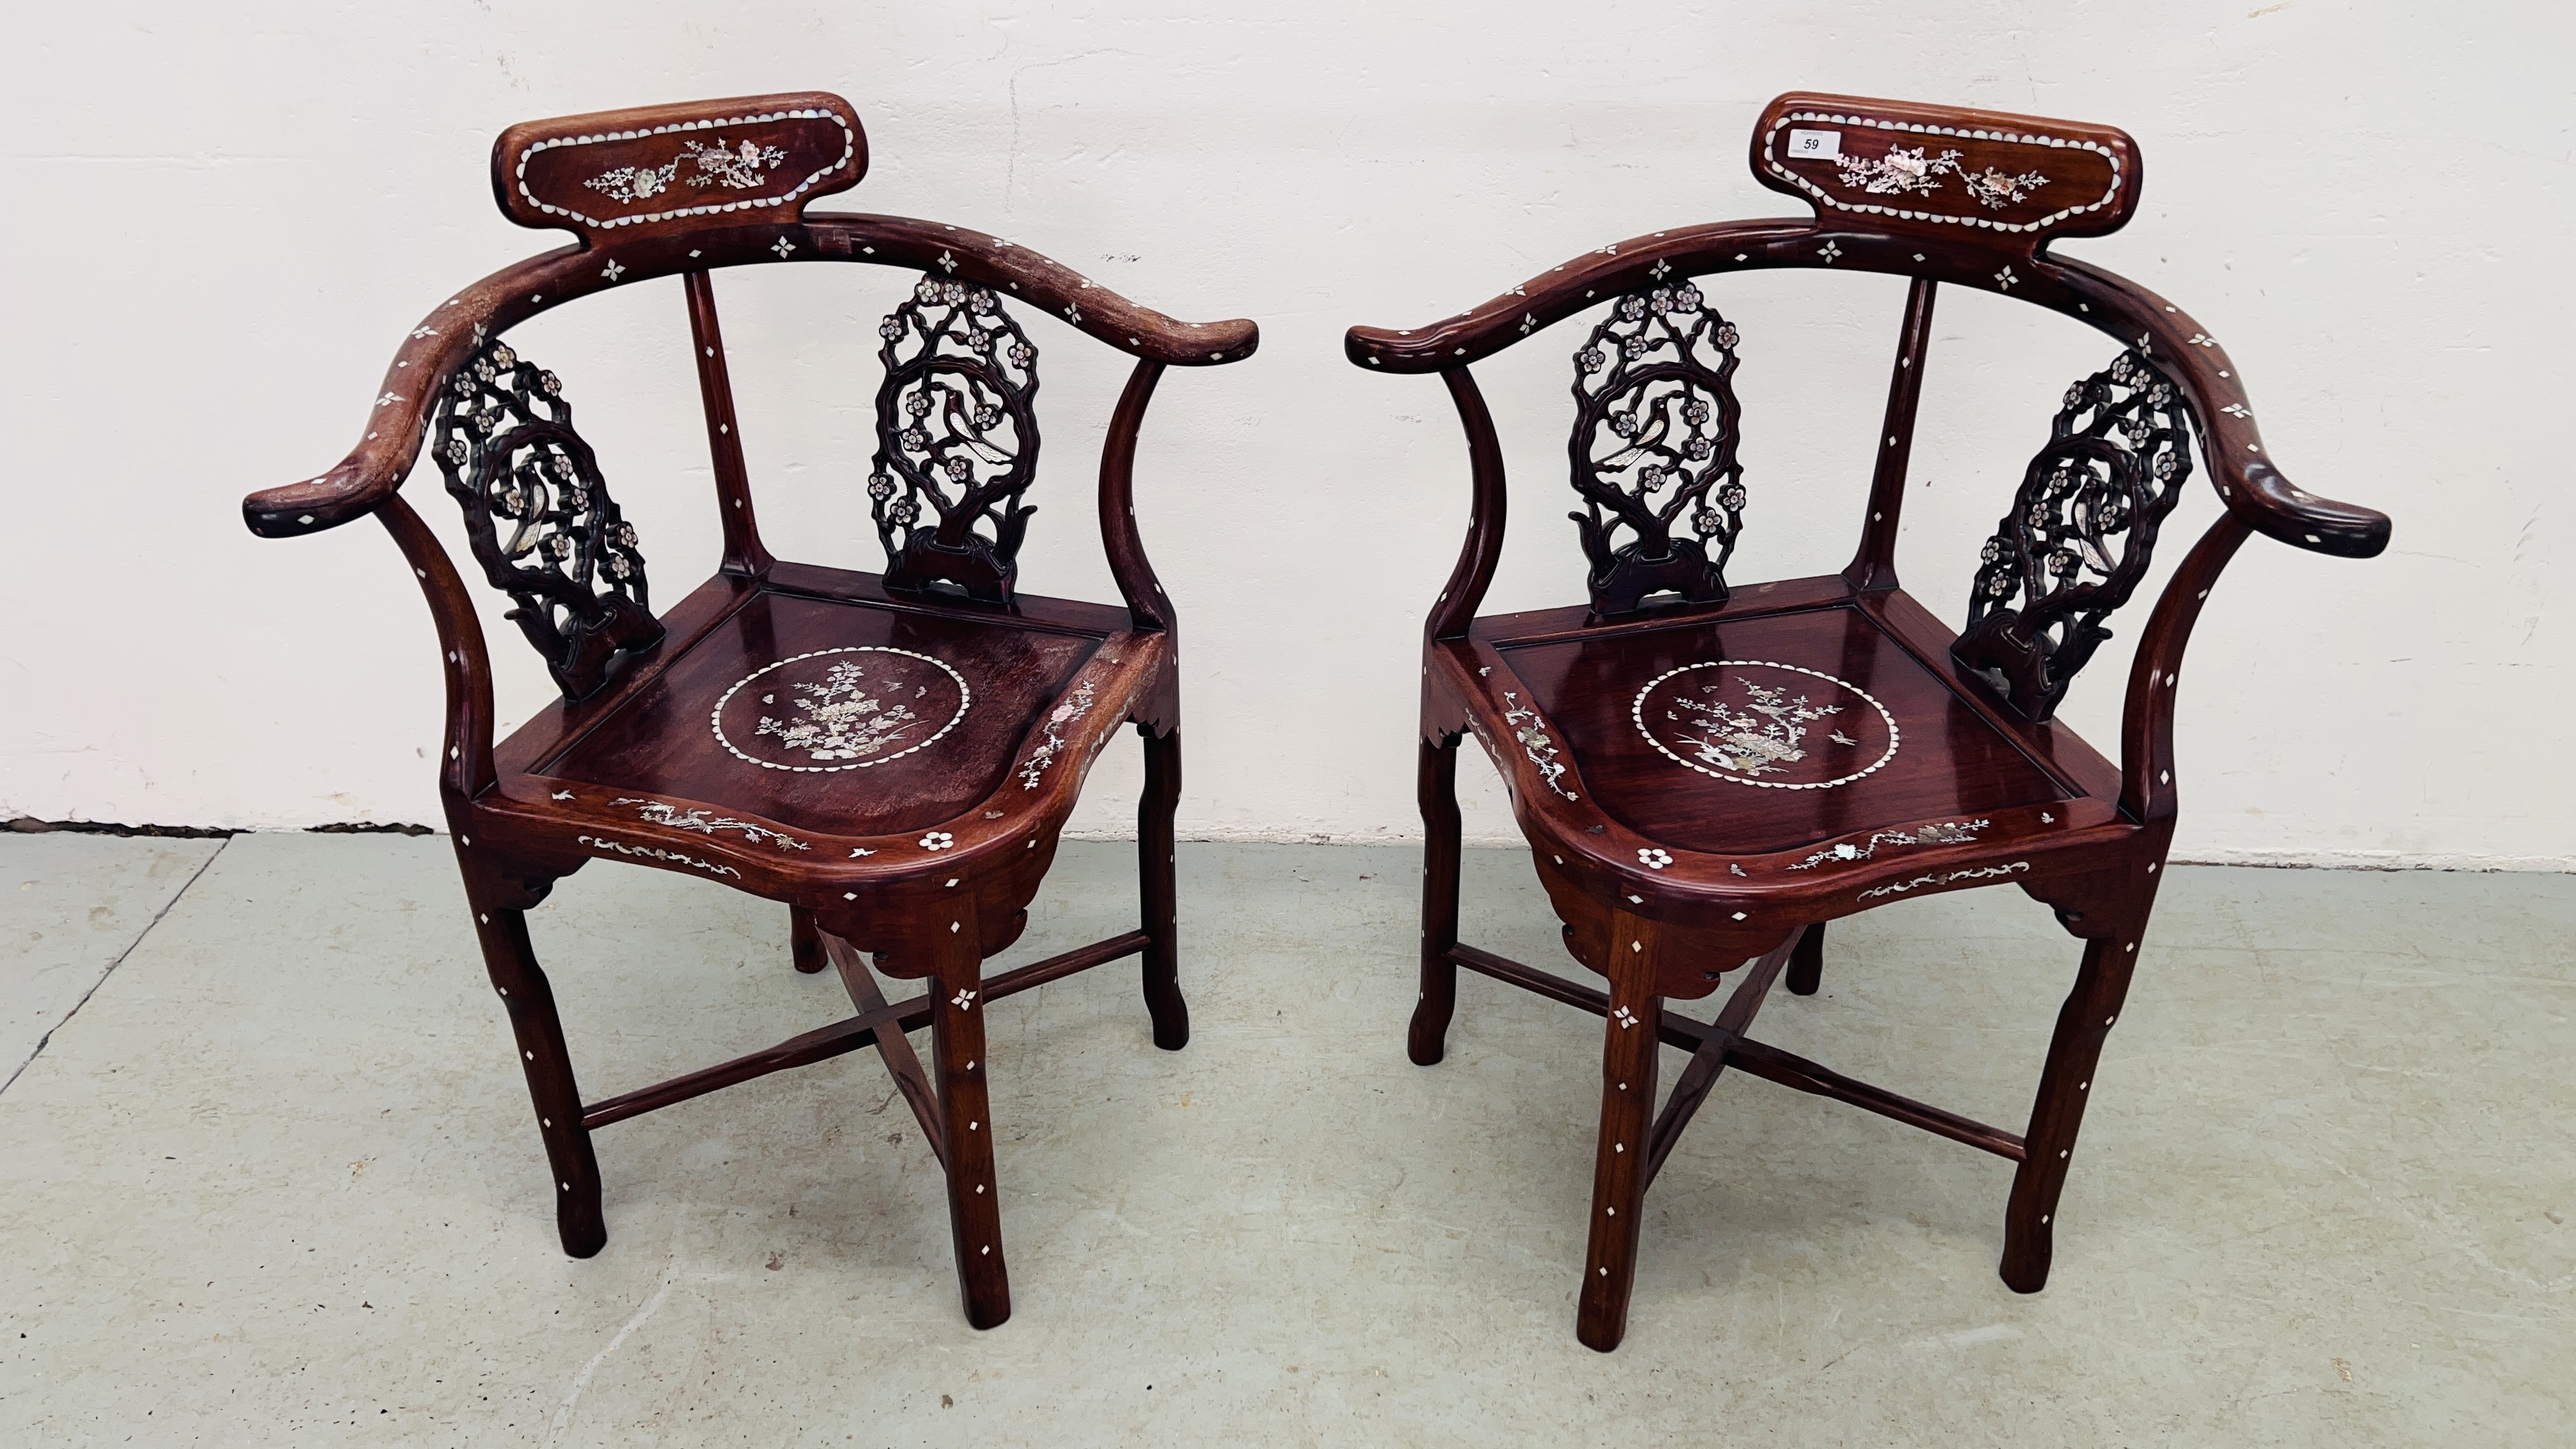 A PAIR OF ORIENTAL HARDWOOD AND MOTHER OF PEARL INLAID CORNER CHAIRS.